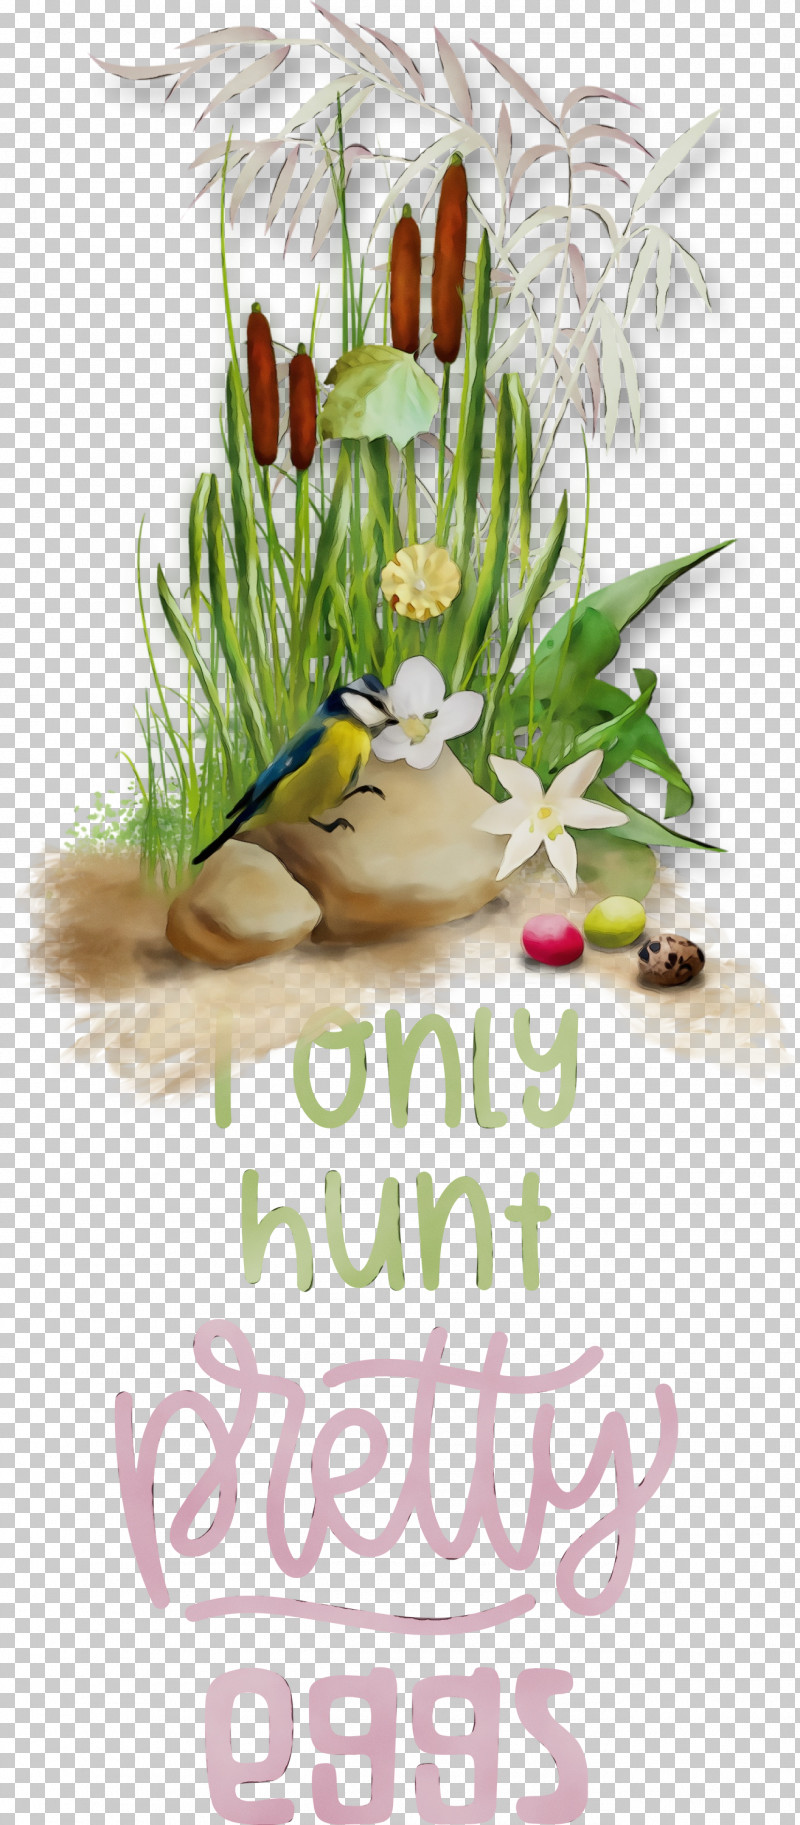 Floral Design PNG, Clipart, Cartoon, Ciao, Easter Day, Egg, Floral Design Free PNG Download